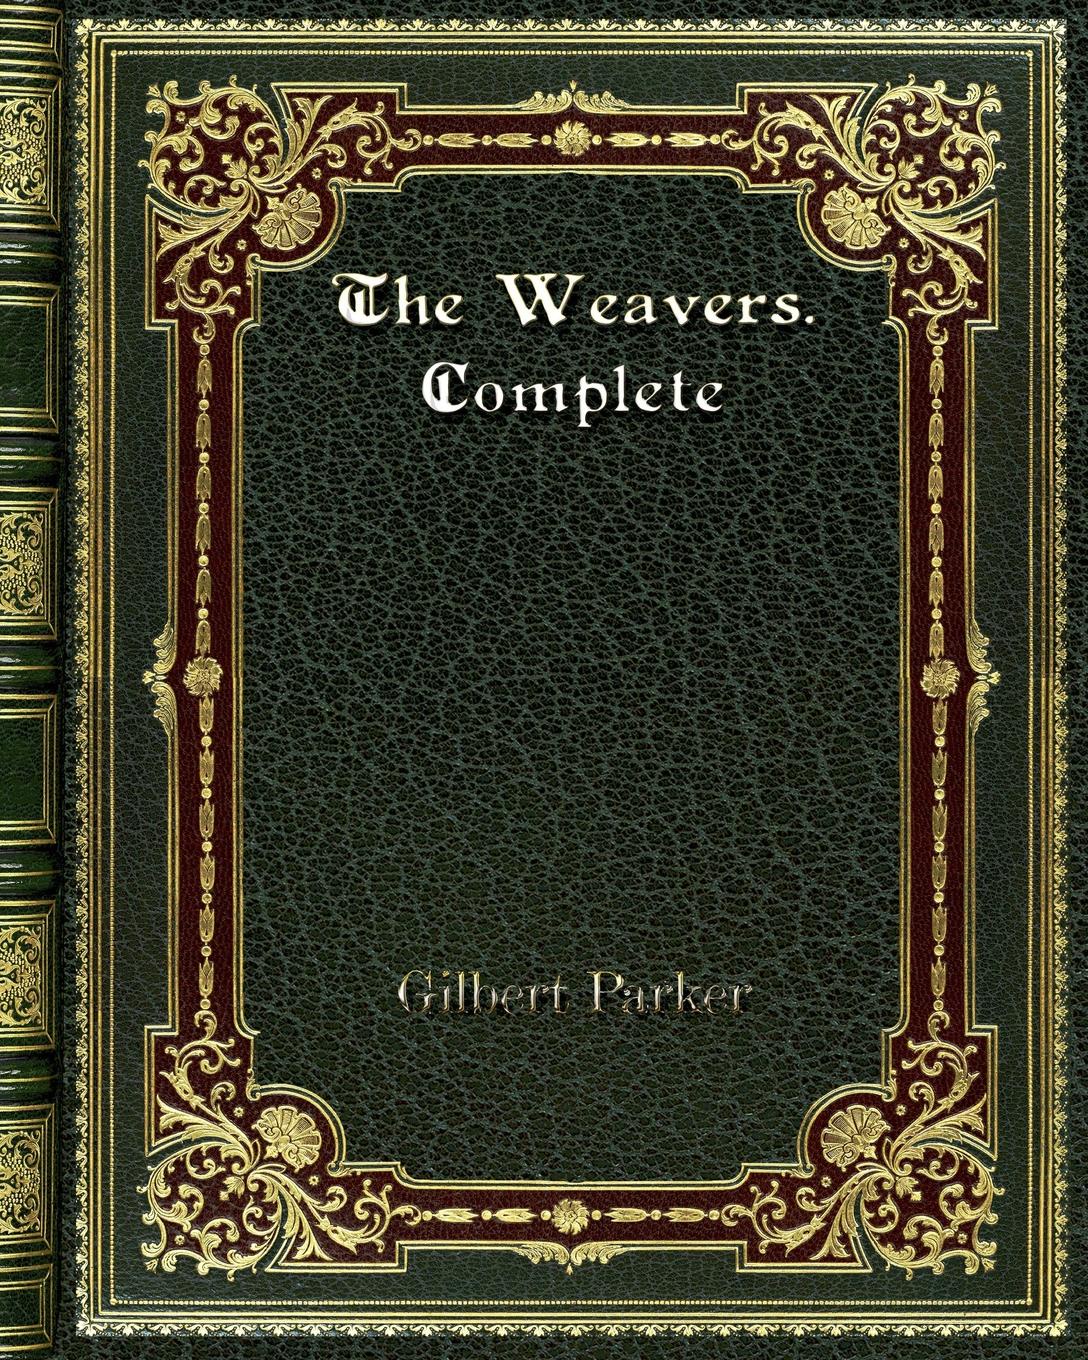 The Weavers. Complete